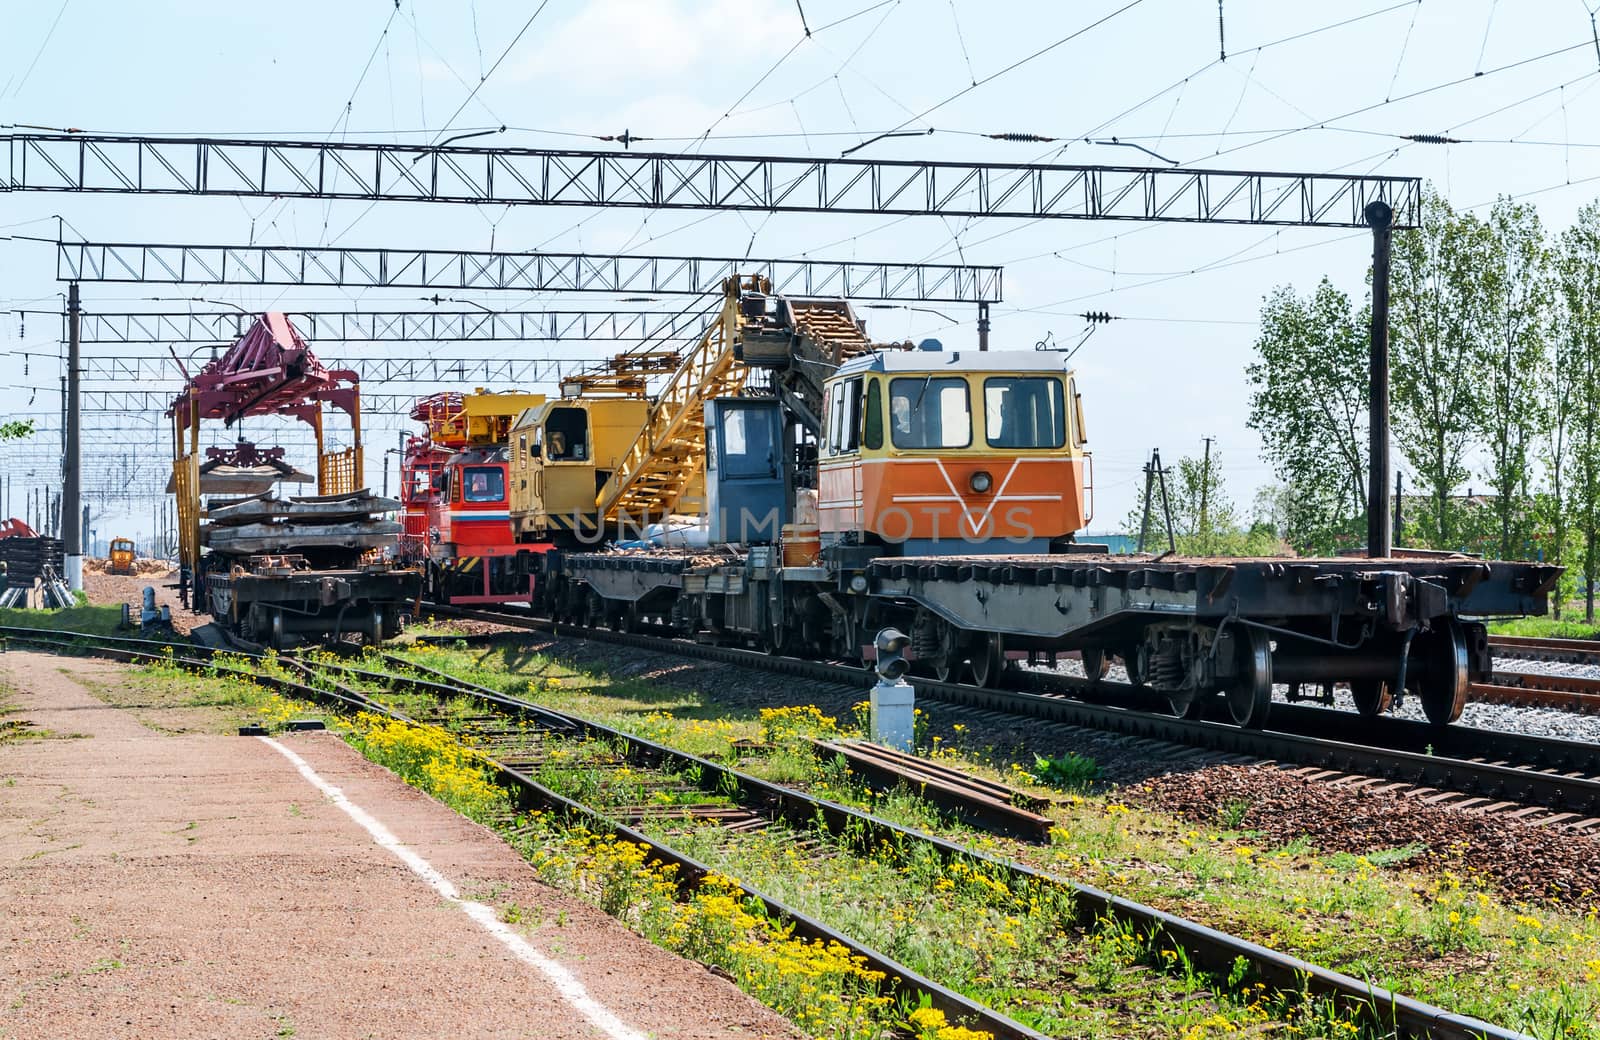 Train with special track equipment at repairs  by zeffss